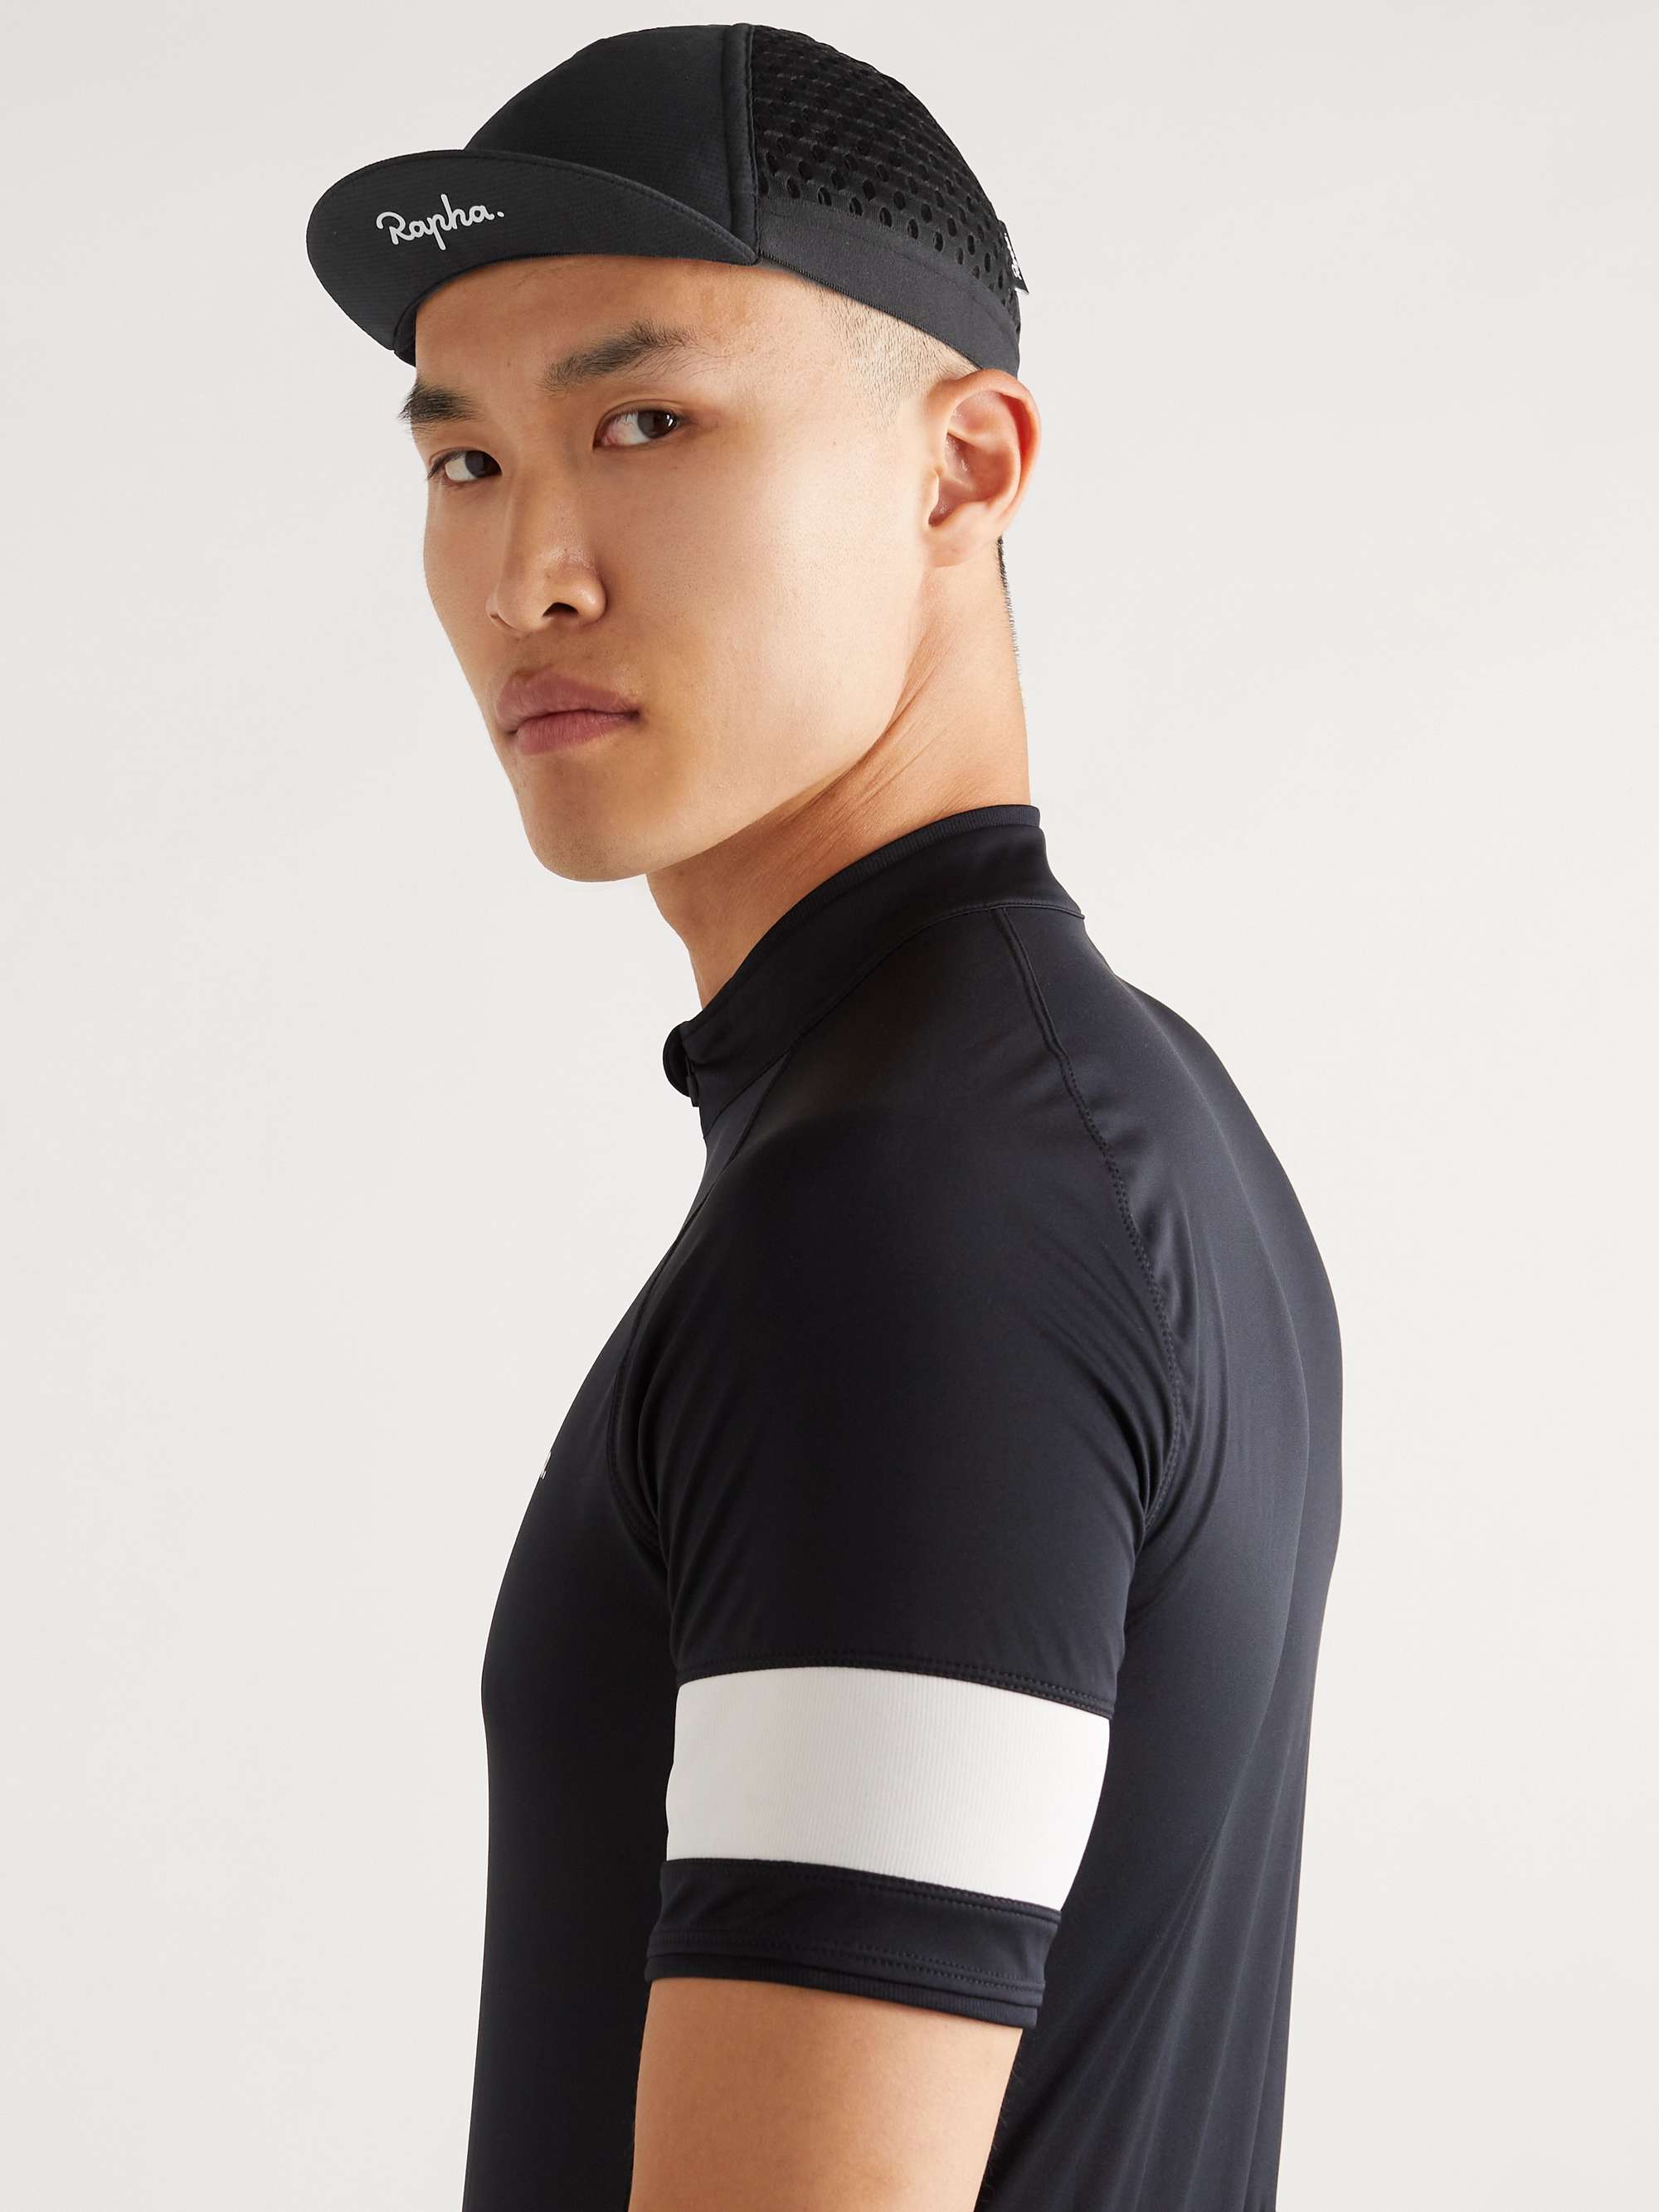 RAPHA Indoor Jersey and Mesh Cycling Cap